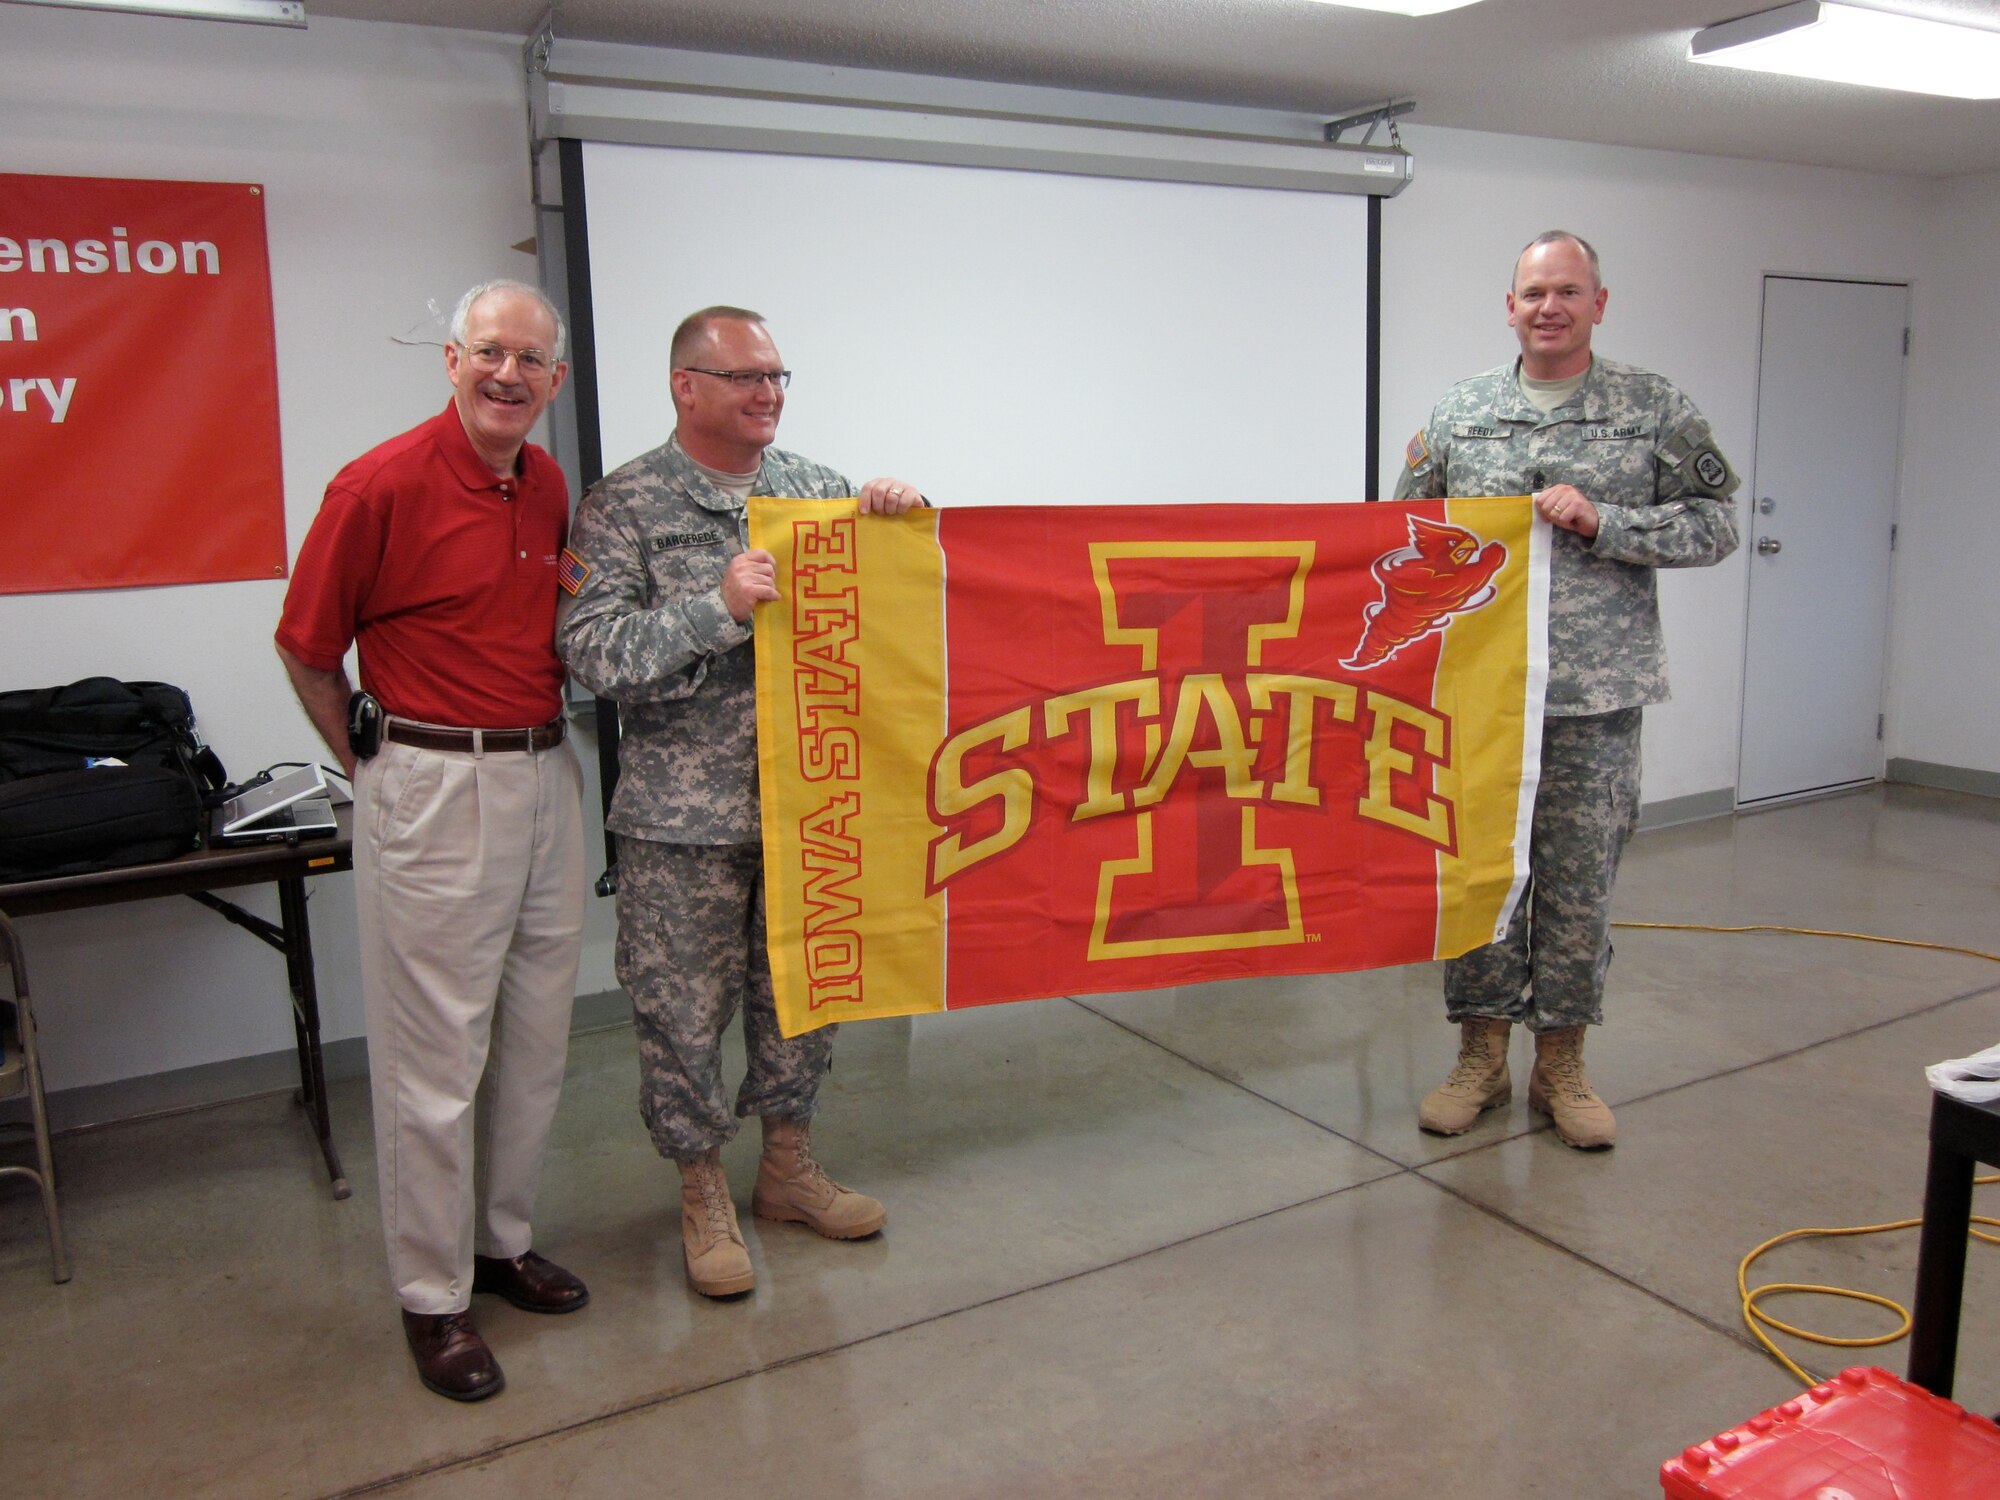 Dr. Gerald Miller, Iowa State University (ISU) Interim Vice President for Extension, presents COL Craig Bargfrede, 734th Agri-Business Development Team (ADT) Commander, and SGM Robert Reedy, 734th ADT Command Sergeant Major, with an ISU flag at the conclusion of ISU-ADT agricultural training.